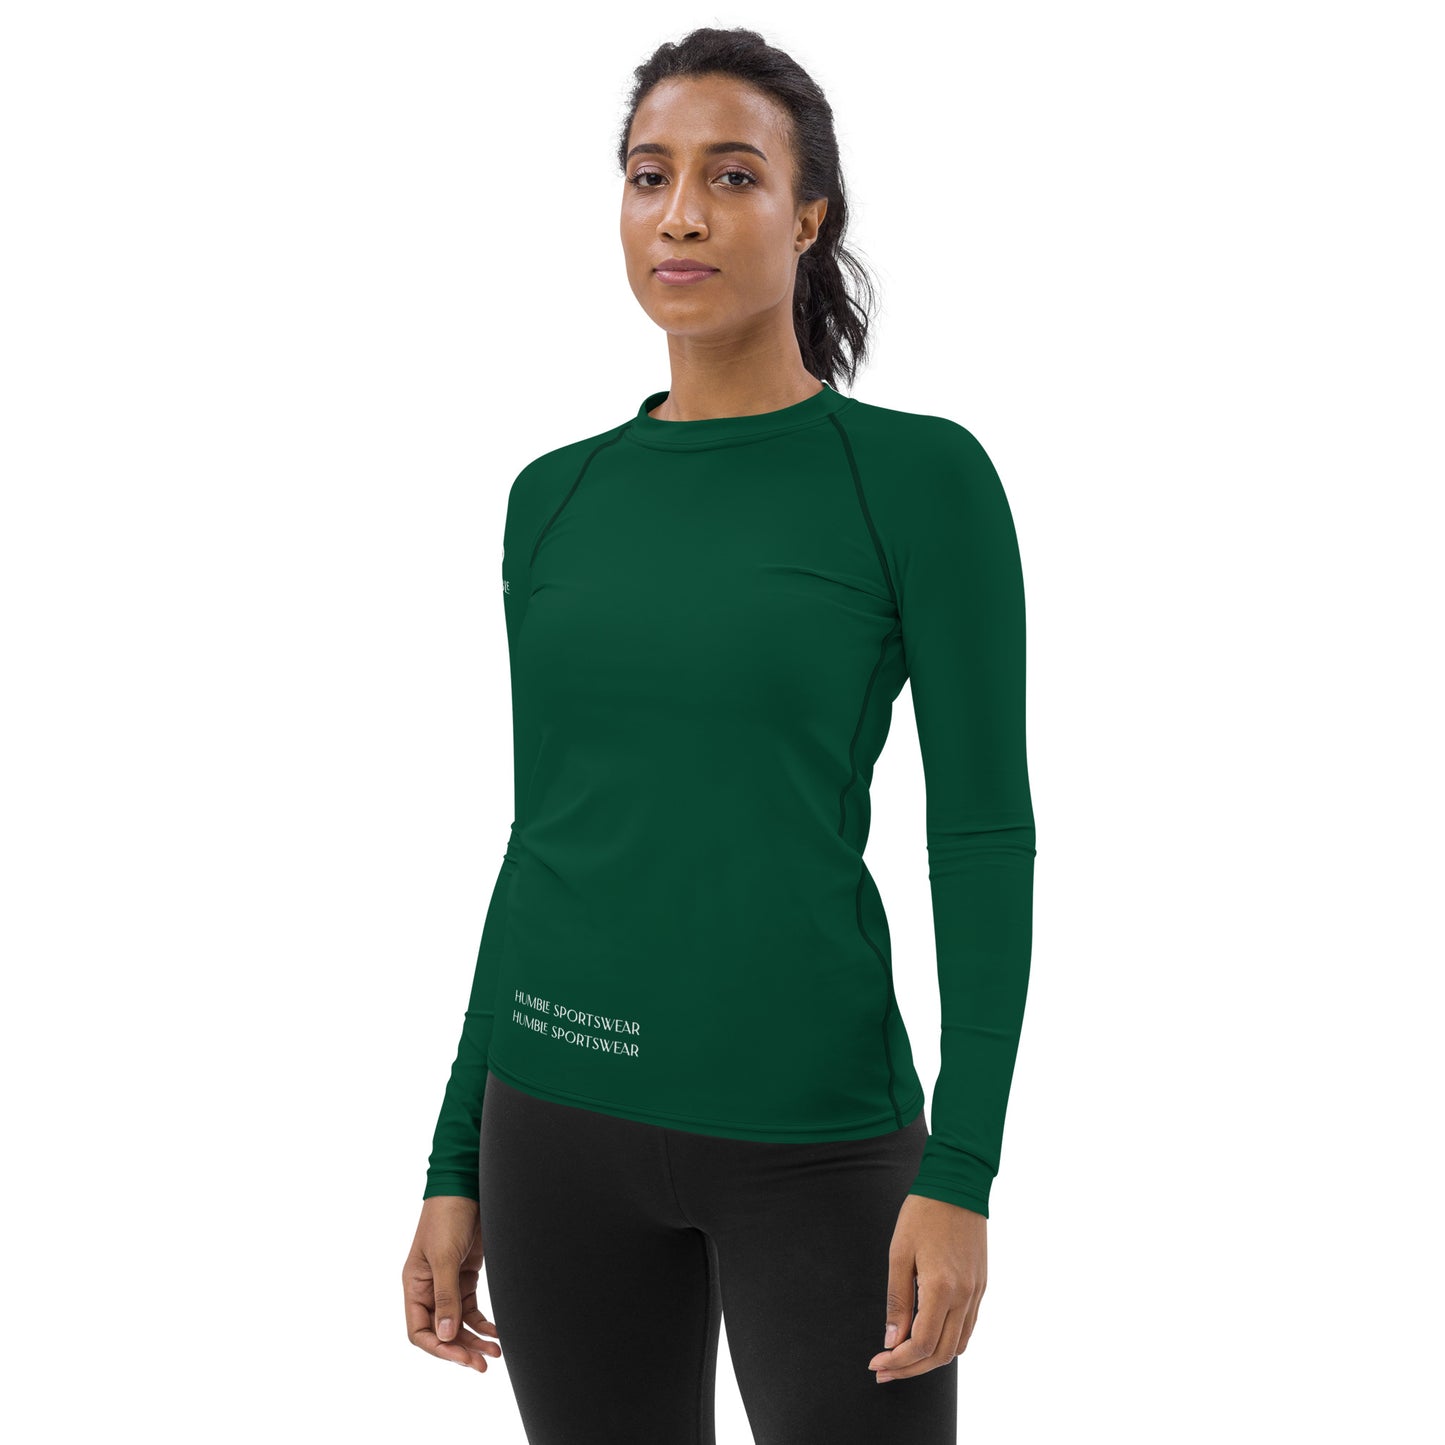 Humble Sportswear, women’s long sleeve tops, color match tops, women’s long sleeve compression wear, compression tops